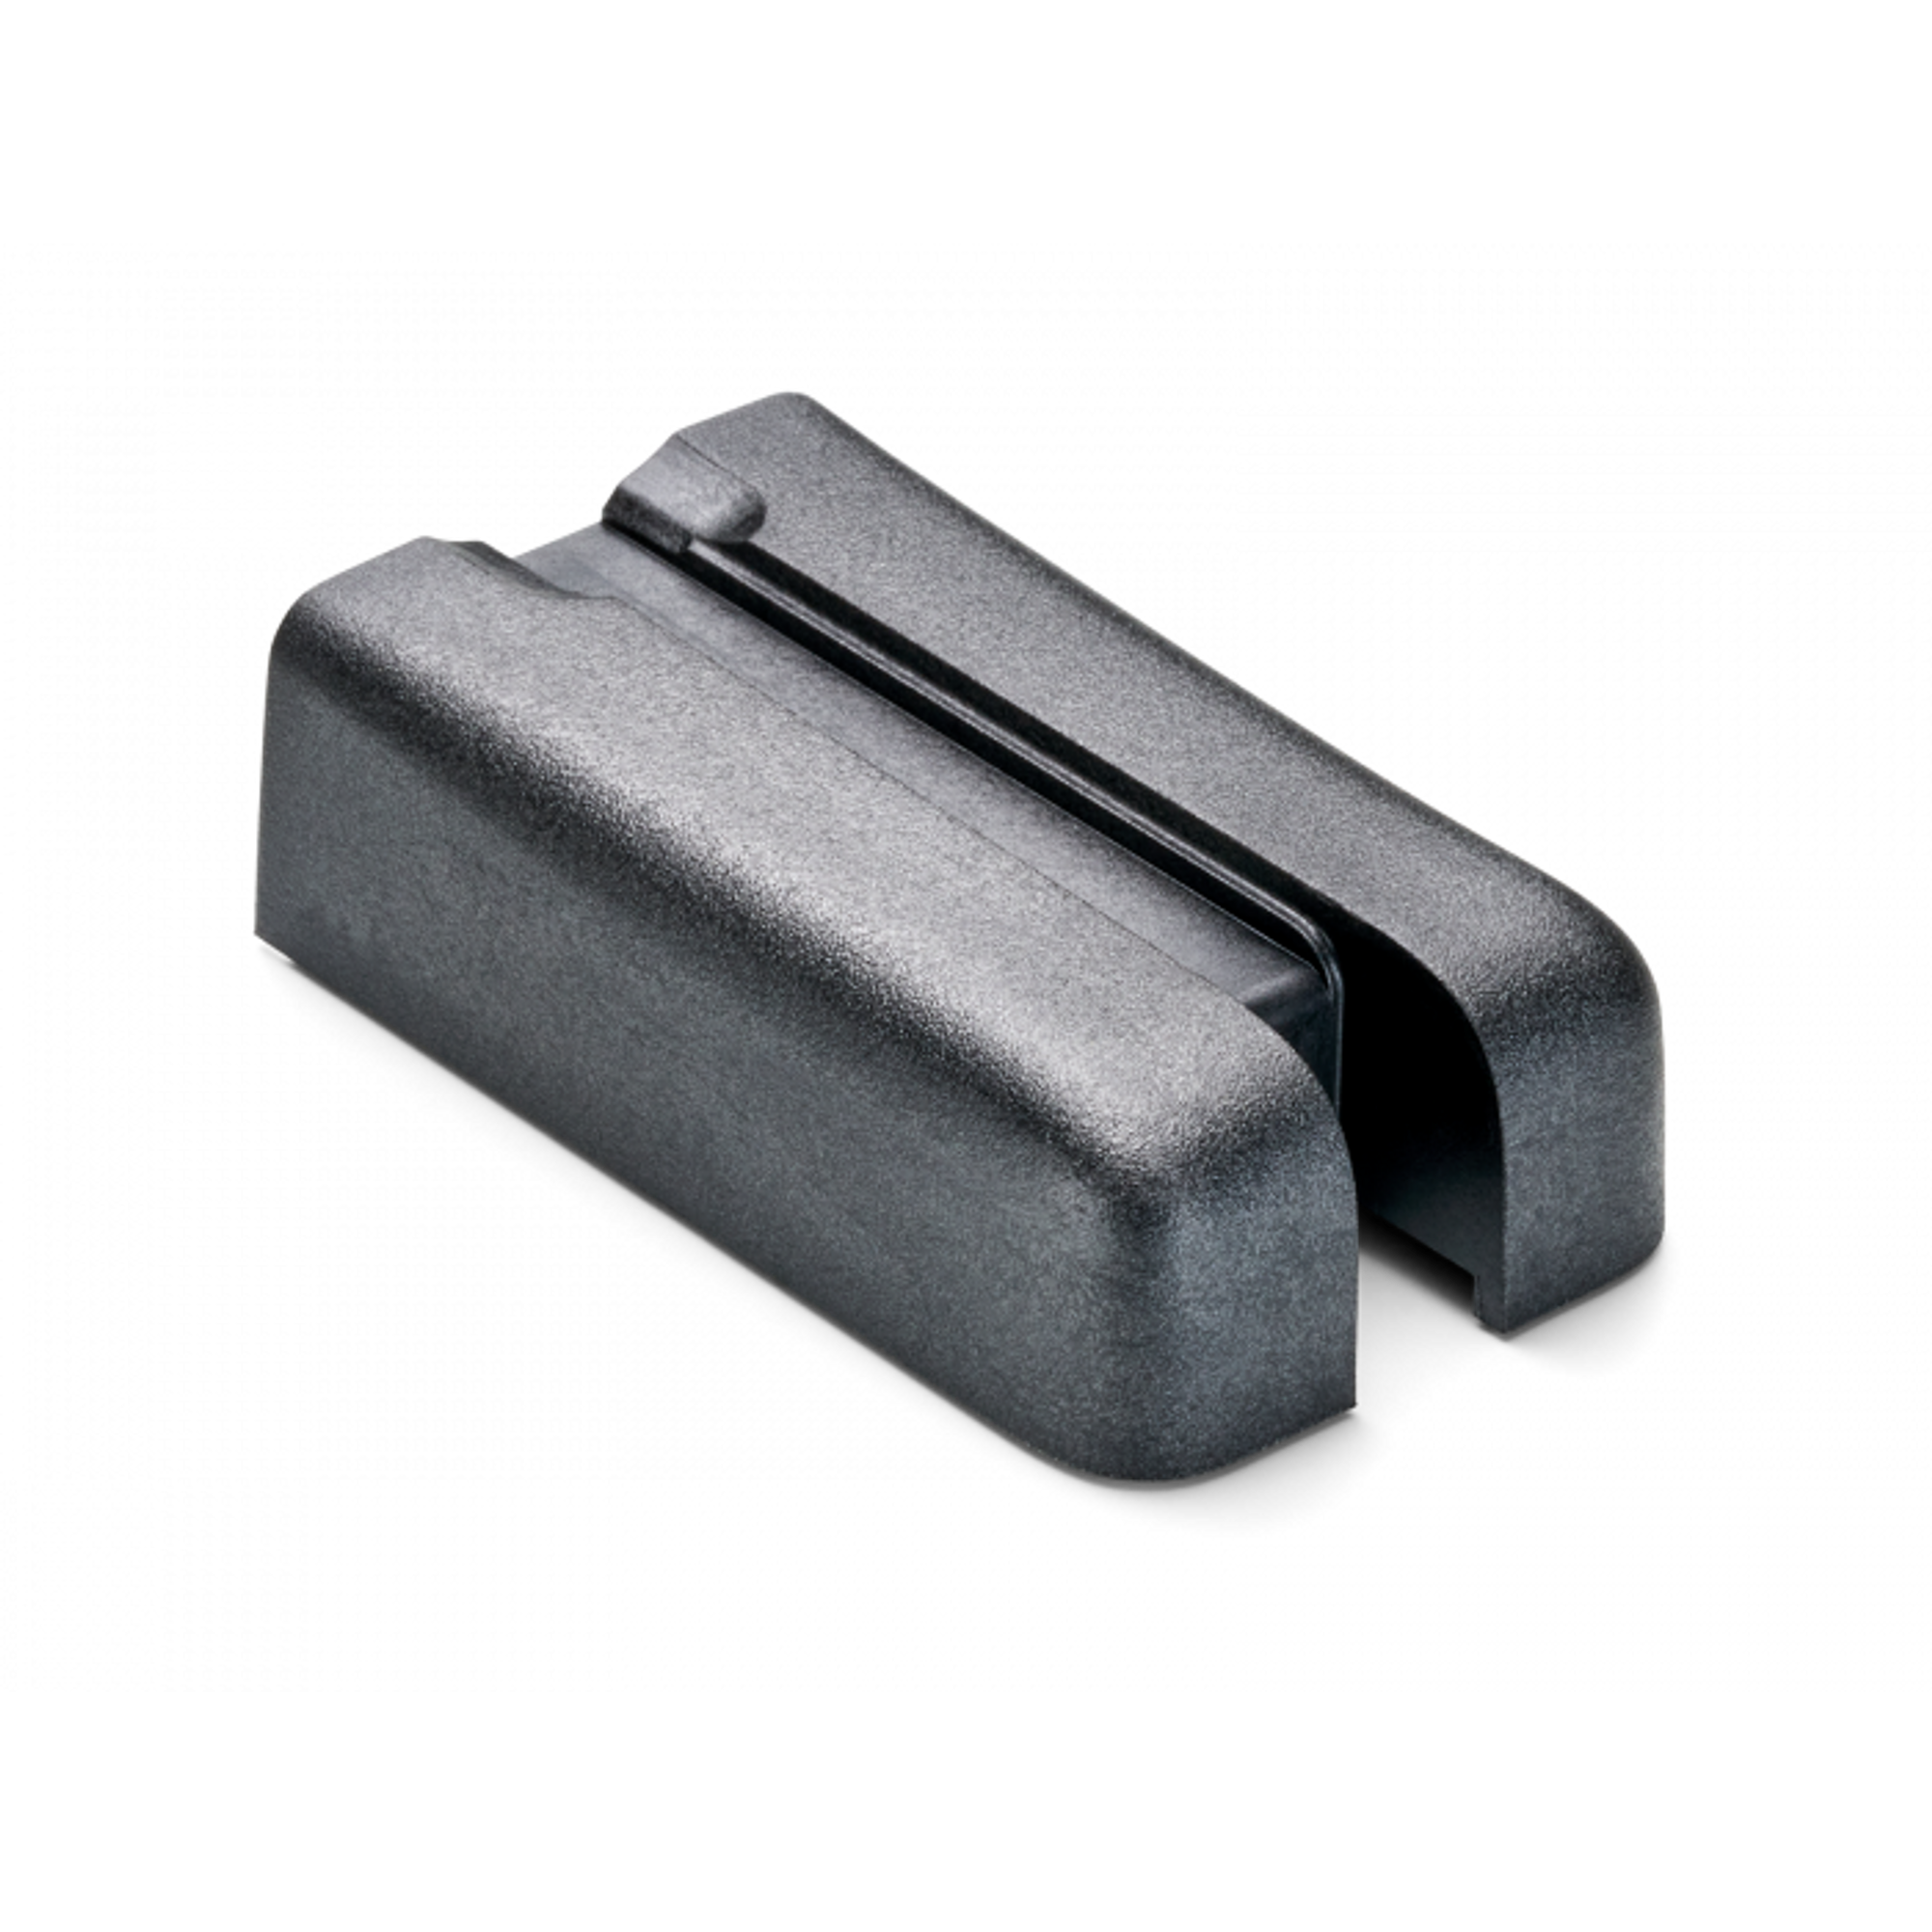 Eotech Battery Compartment for 512, 552 (Post-2009)